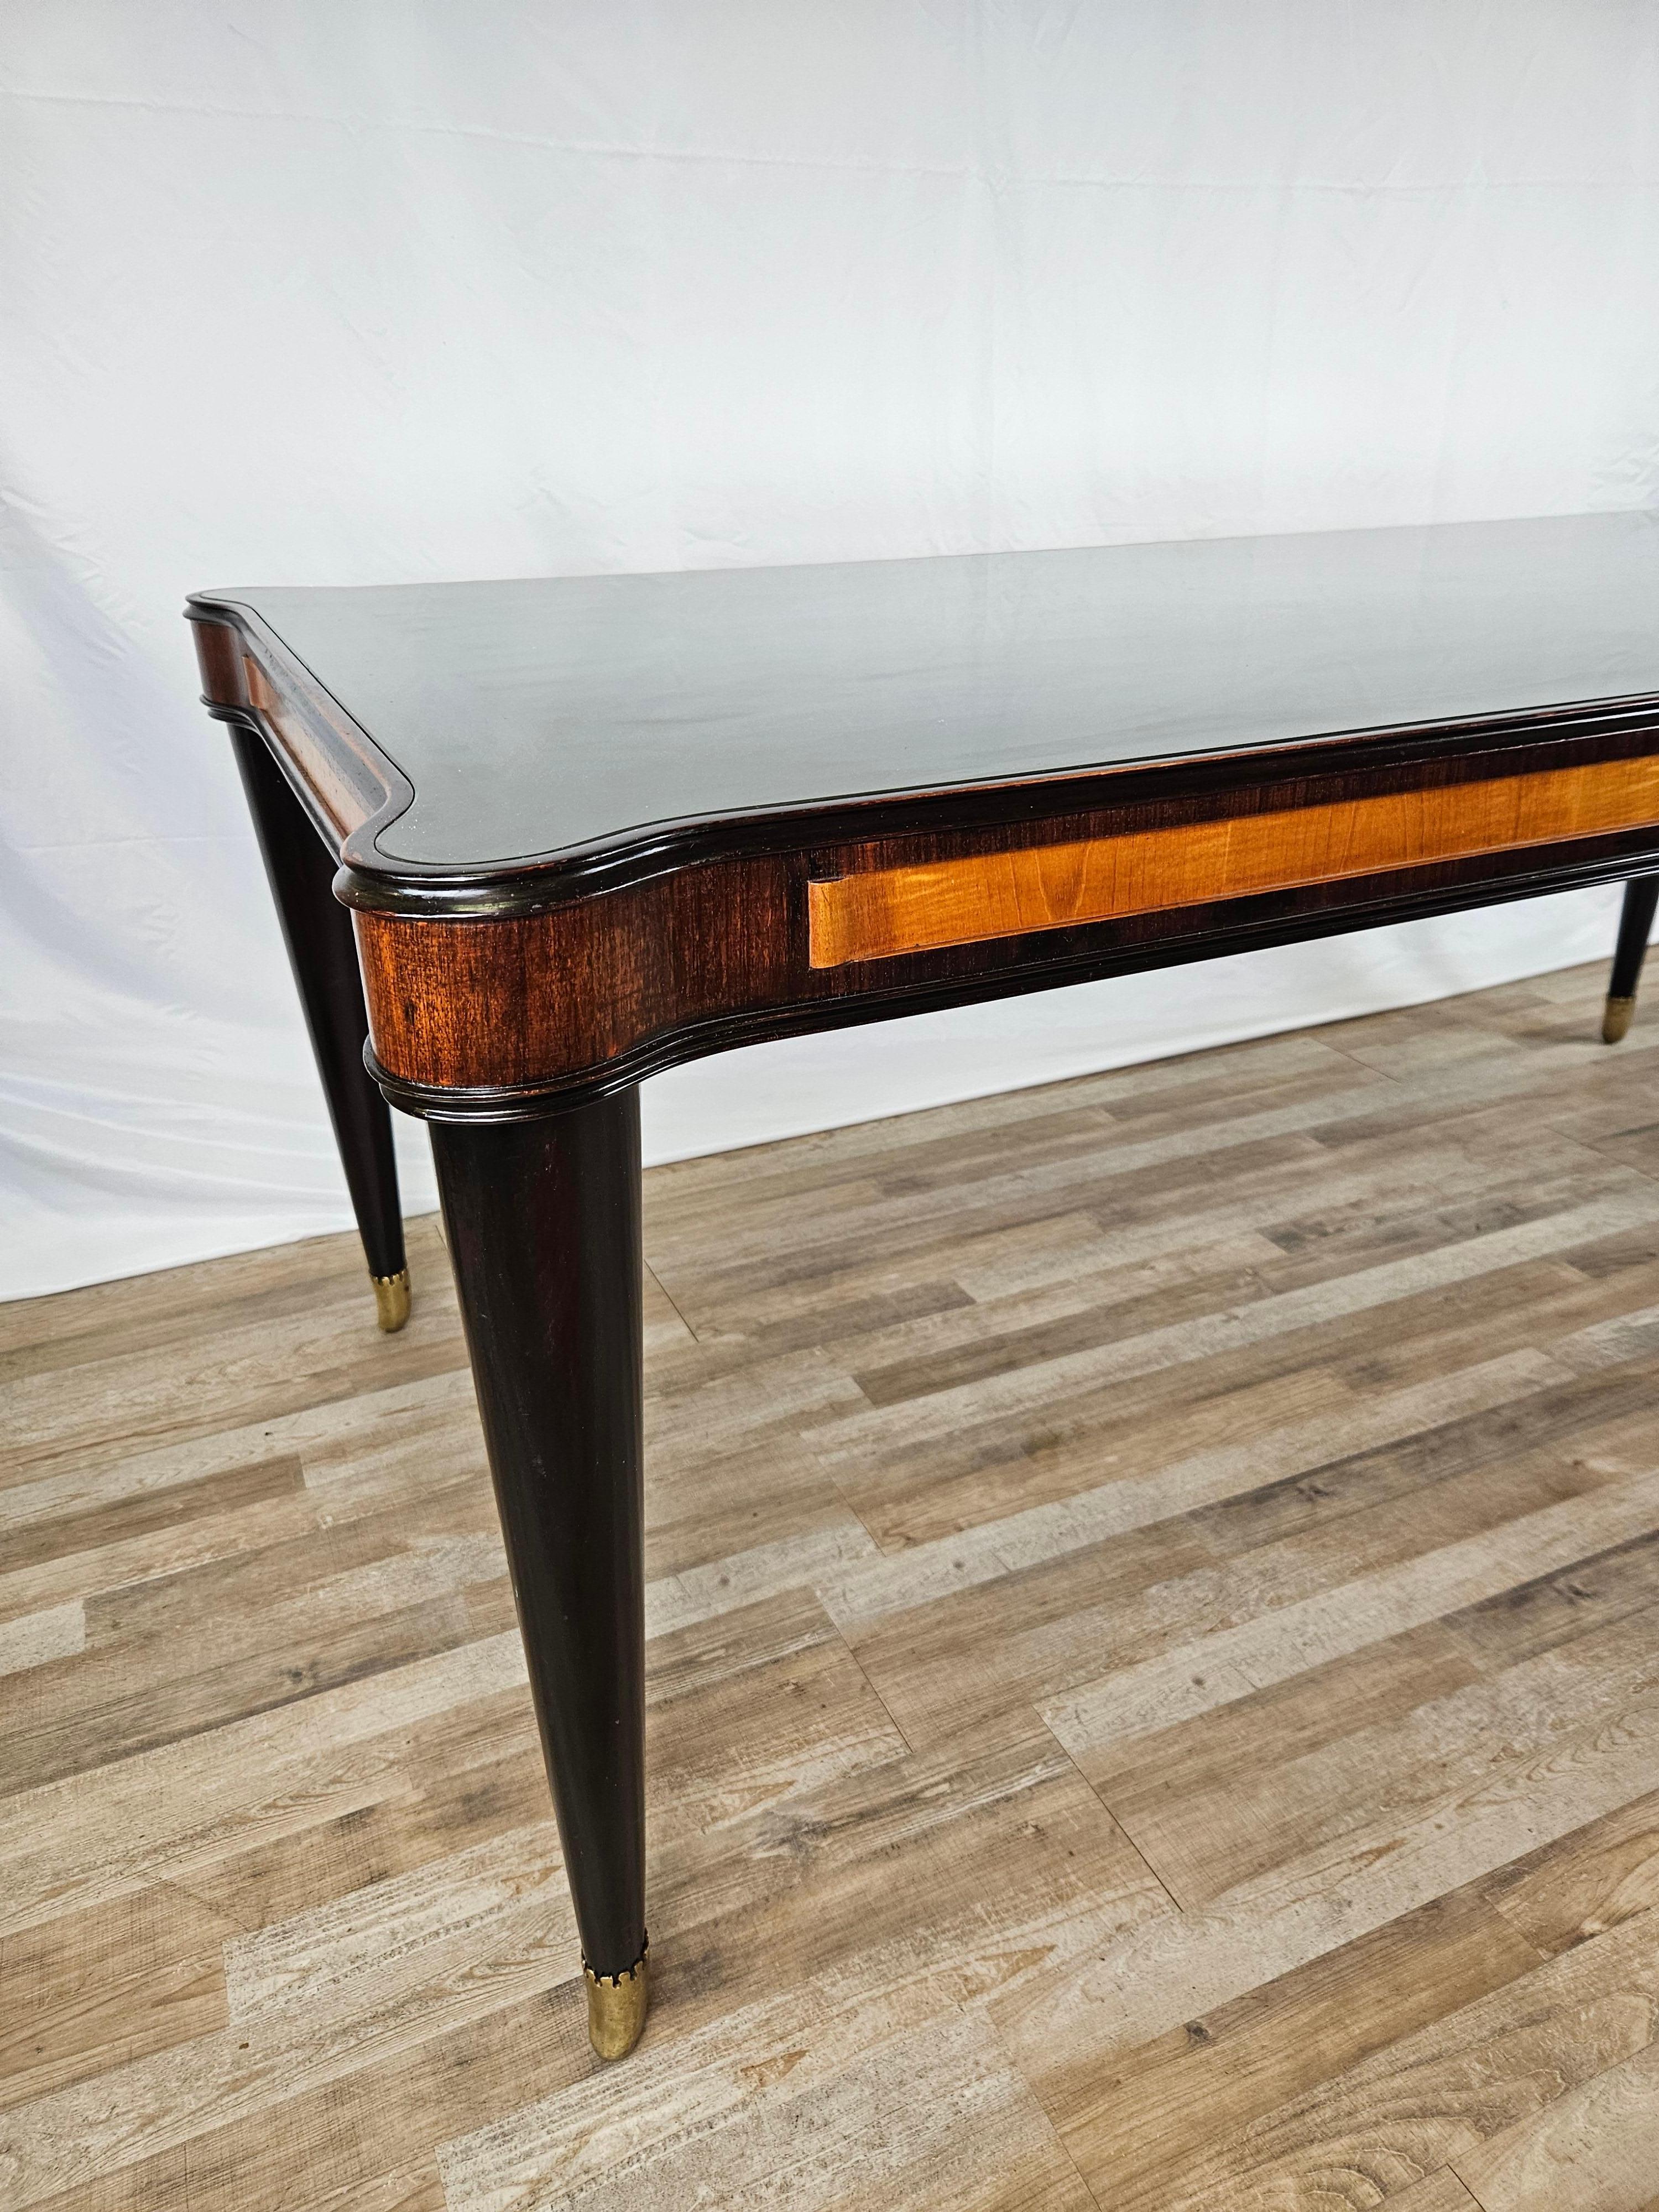 Elegant Italian-made dining table with teal glass top and structure in various types of wood.

It is a design piece of furniture, a 1950s piece of furniture with ebony legs and mahogany structure with central details in pink maple.
Note the